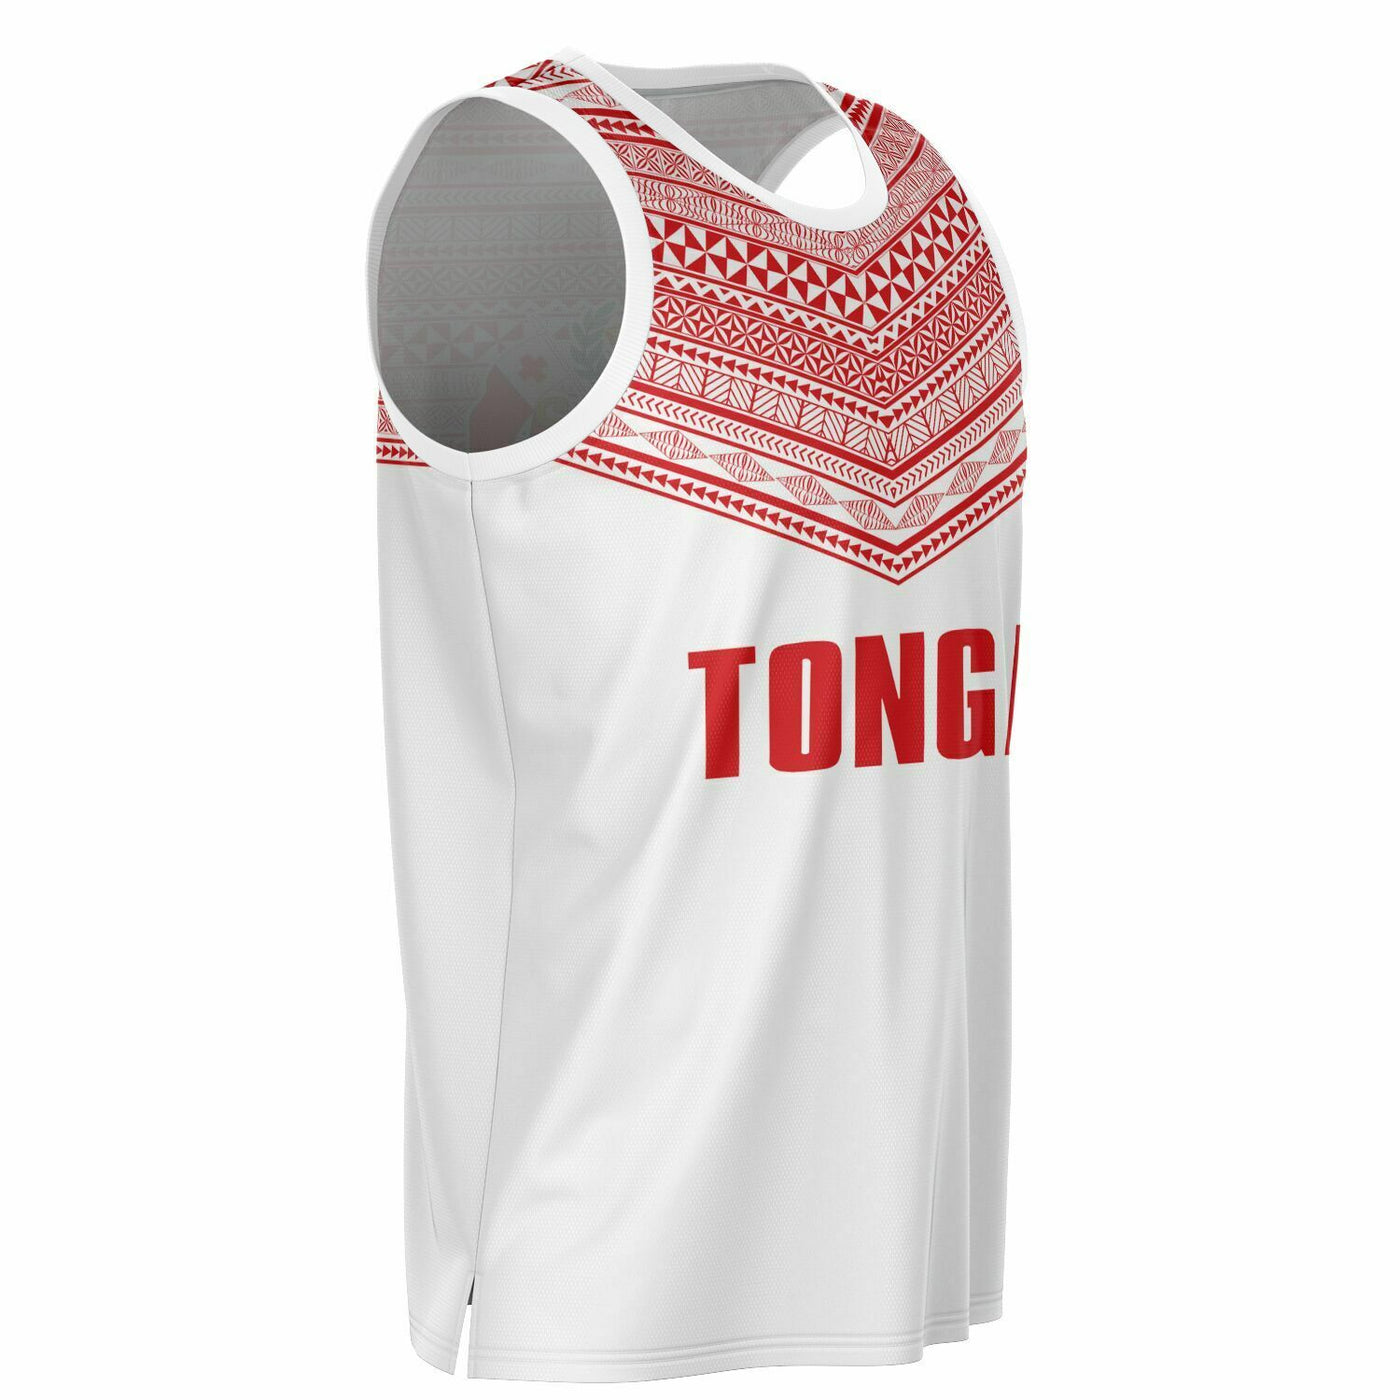 basketball jersey design white and red